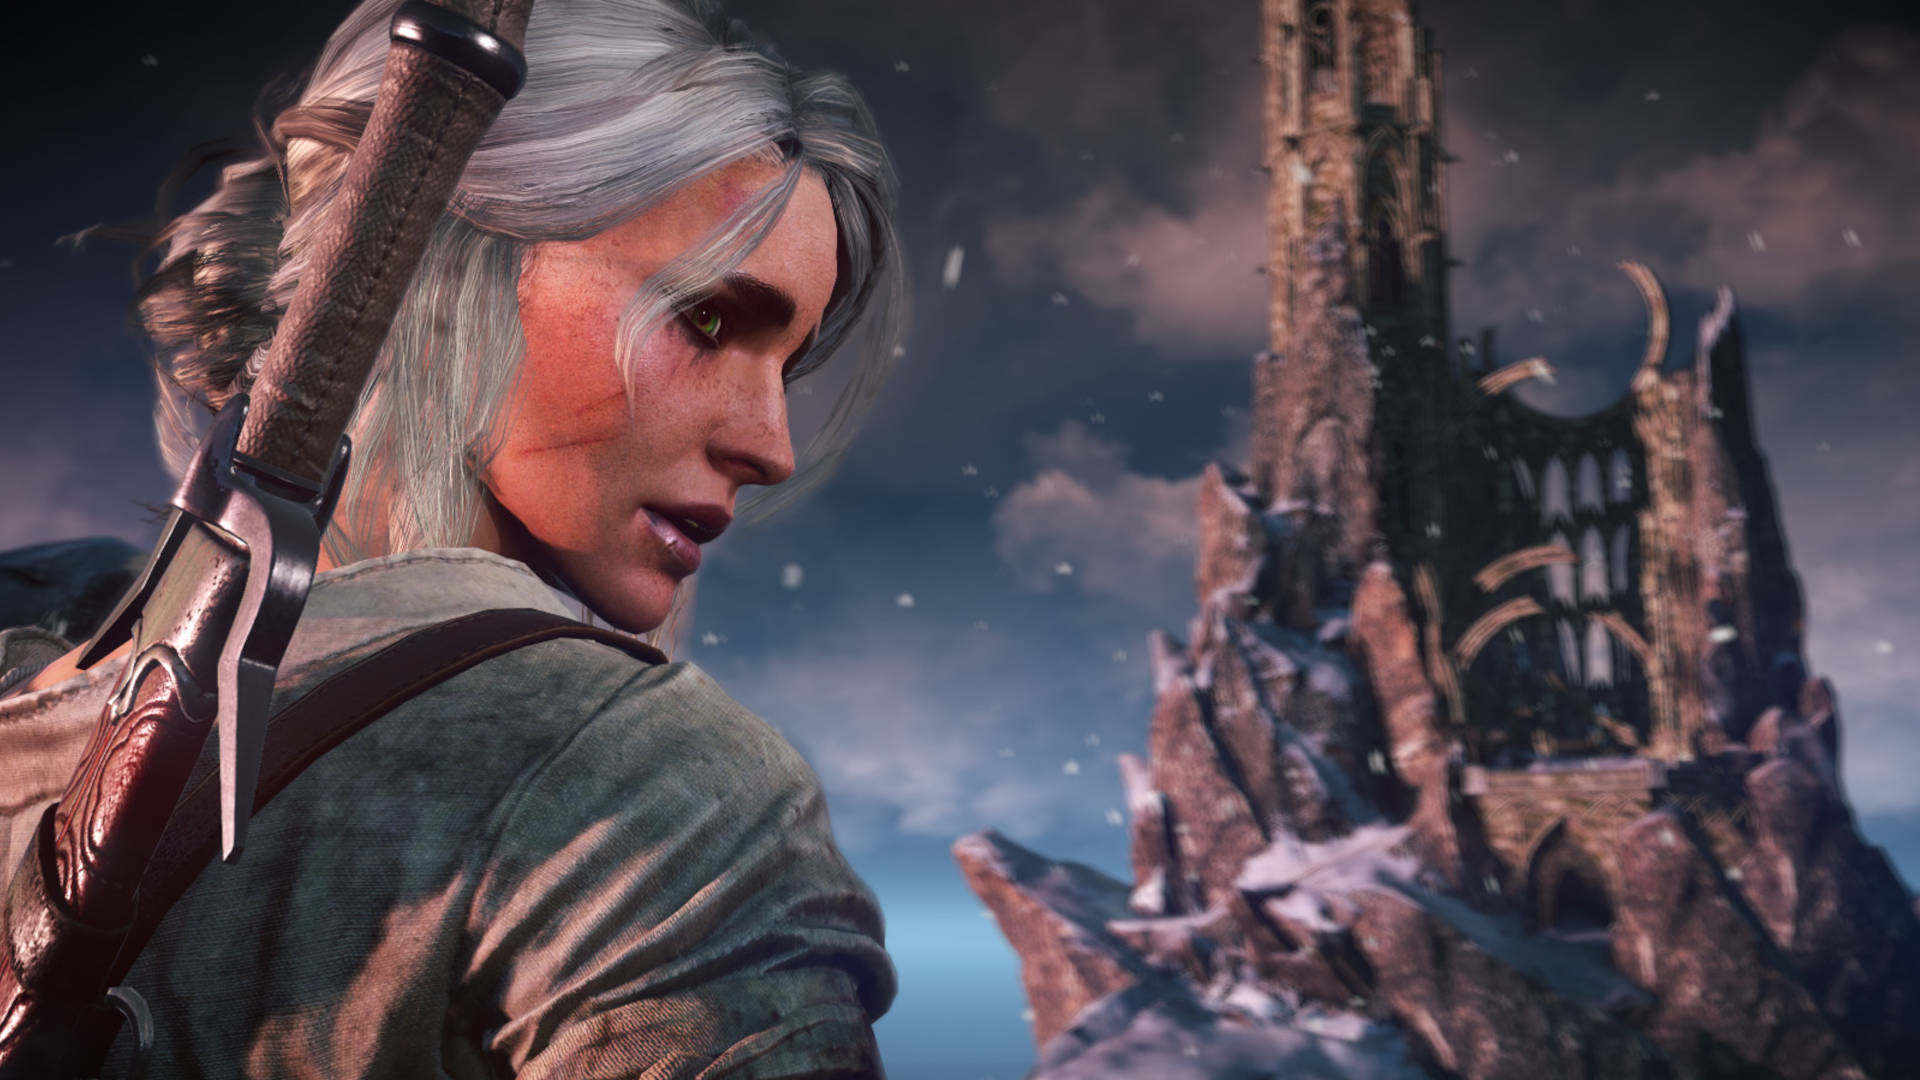 Best RPG games - Ciri from Witcher 3 is standing on a cliff face overlooking a castle on a hill.